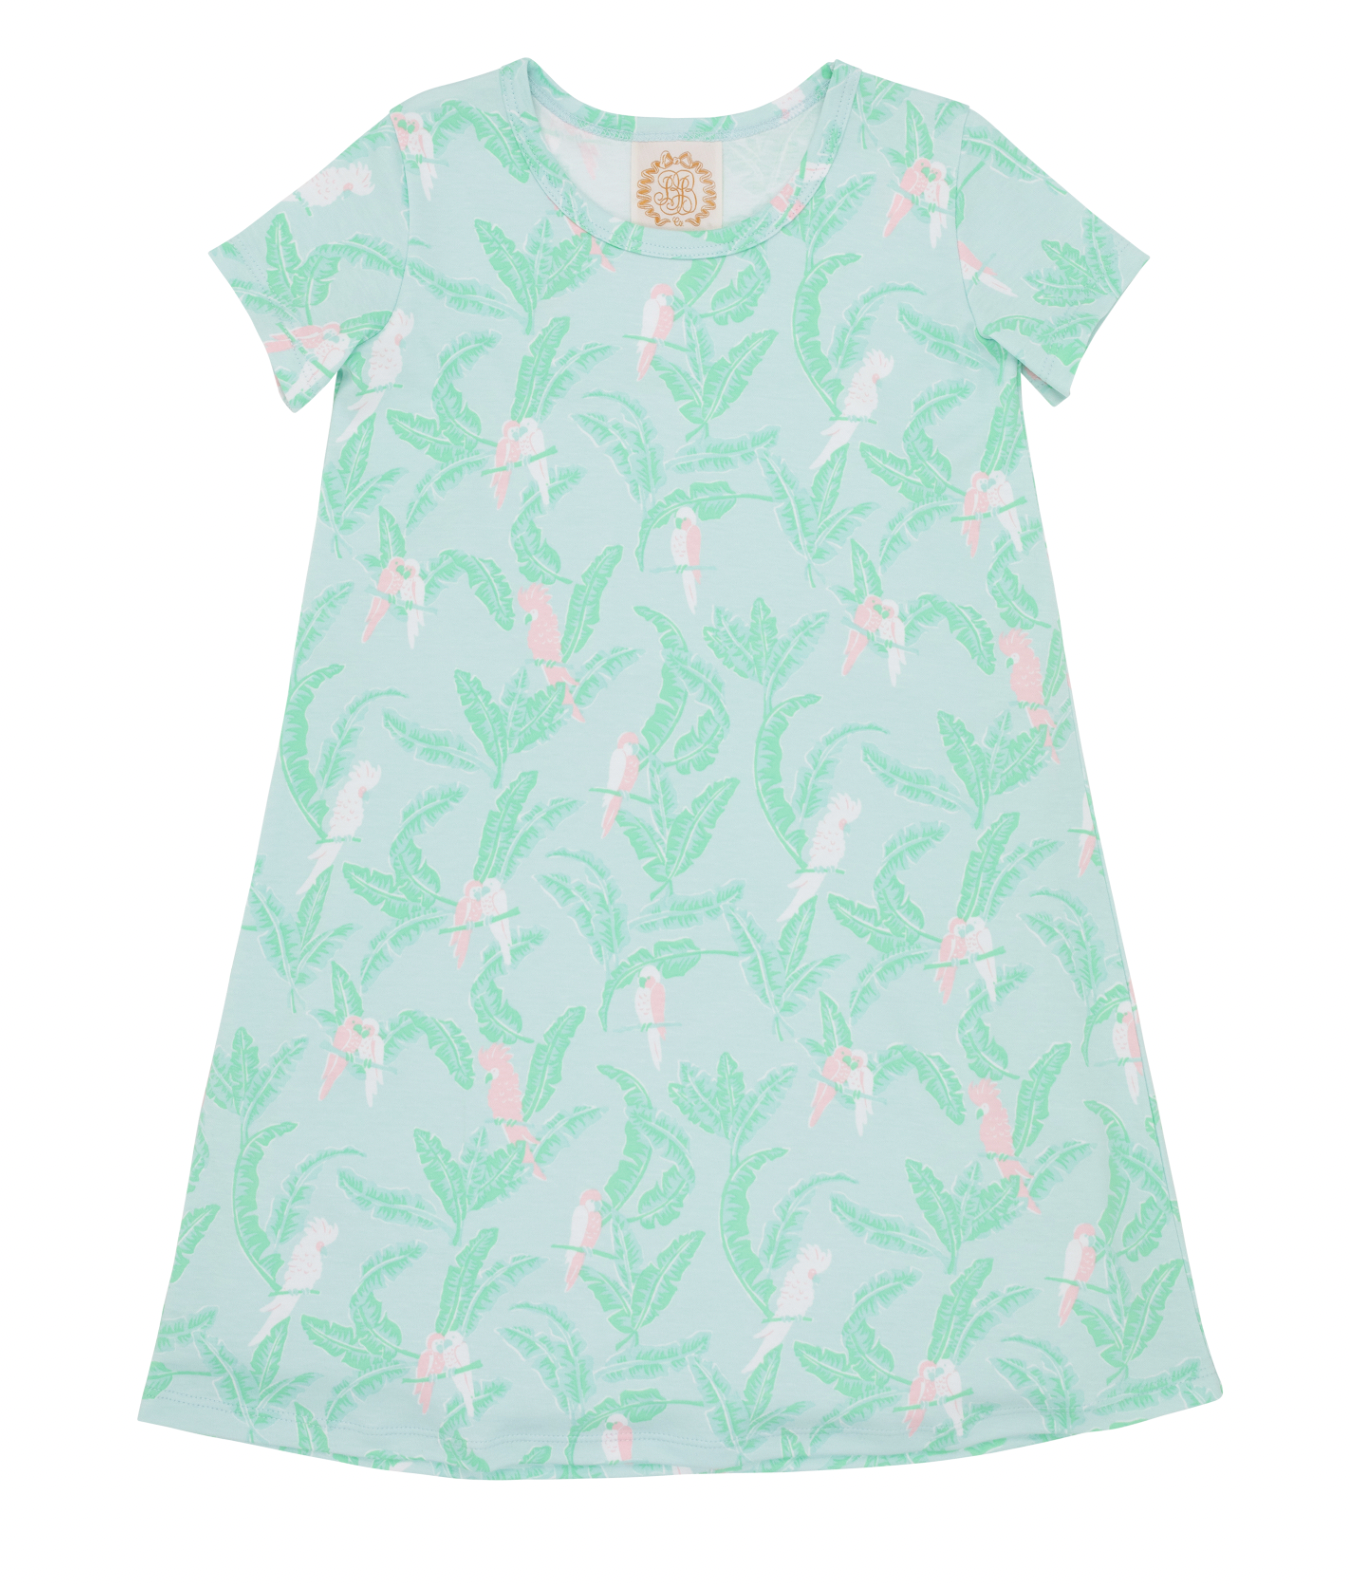 Polly Play Dress-Parrot Island Palms